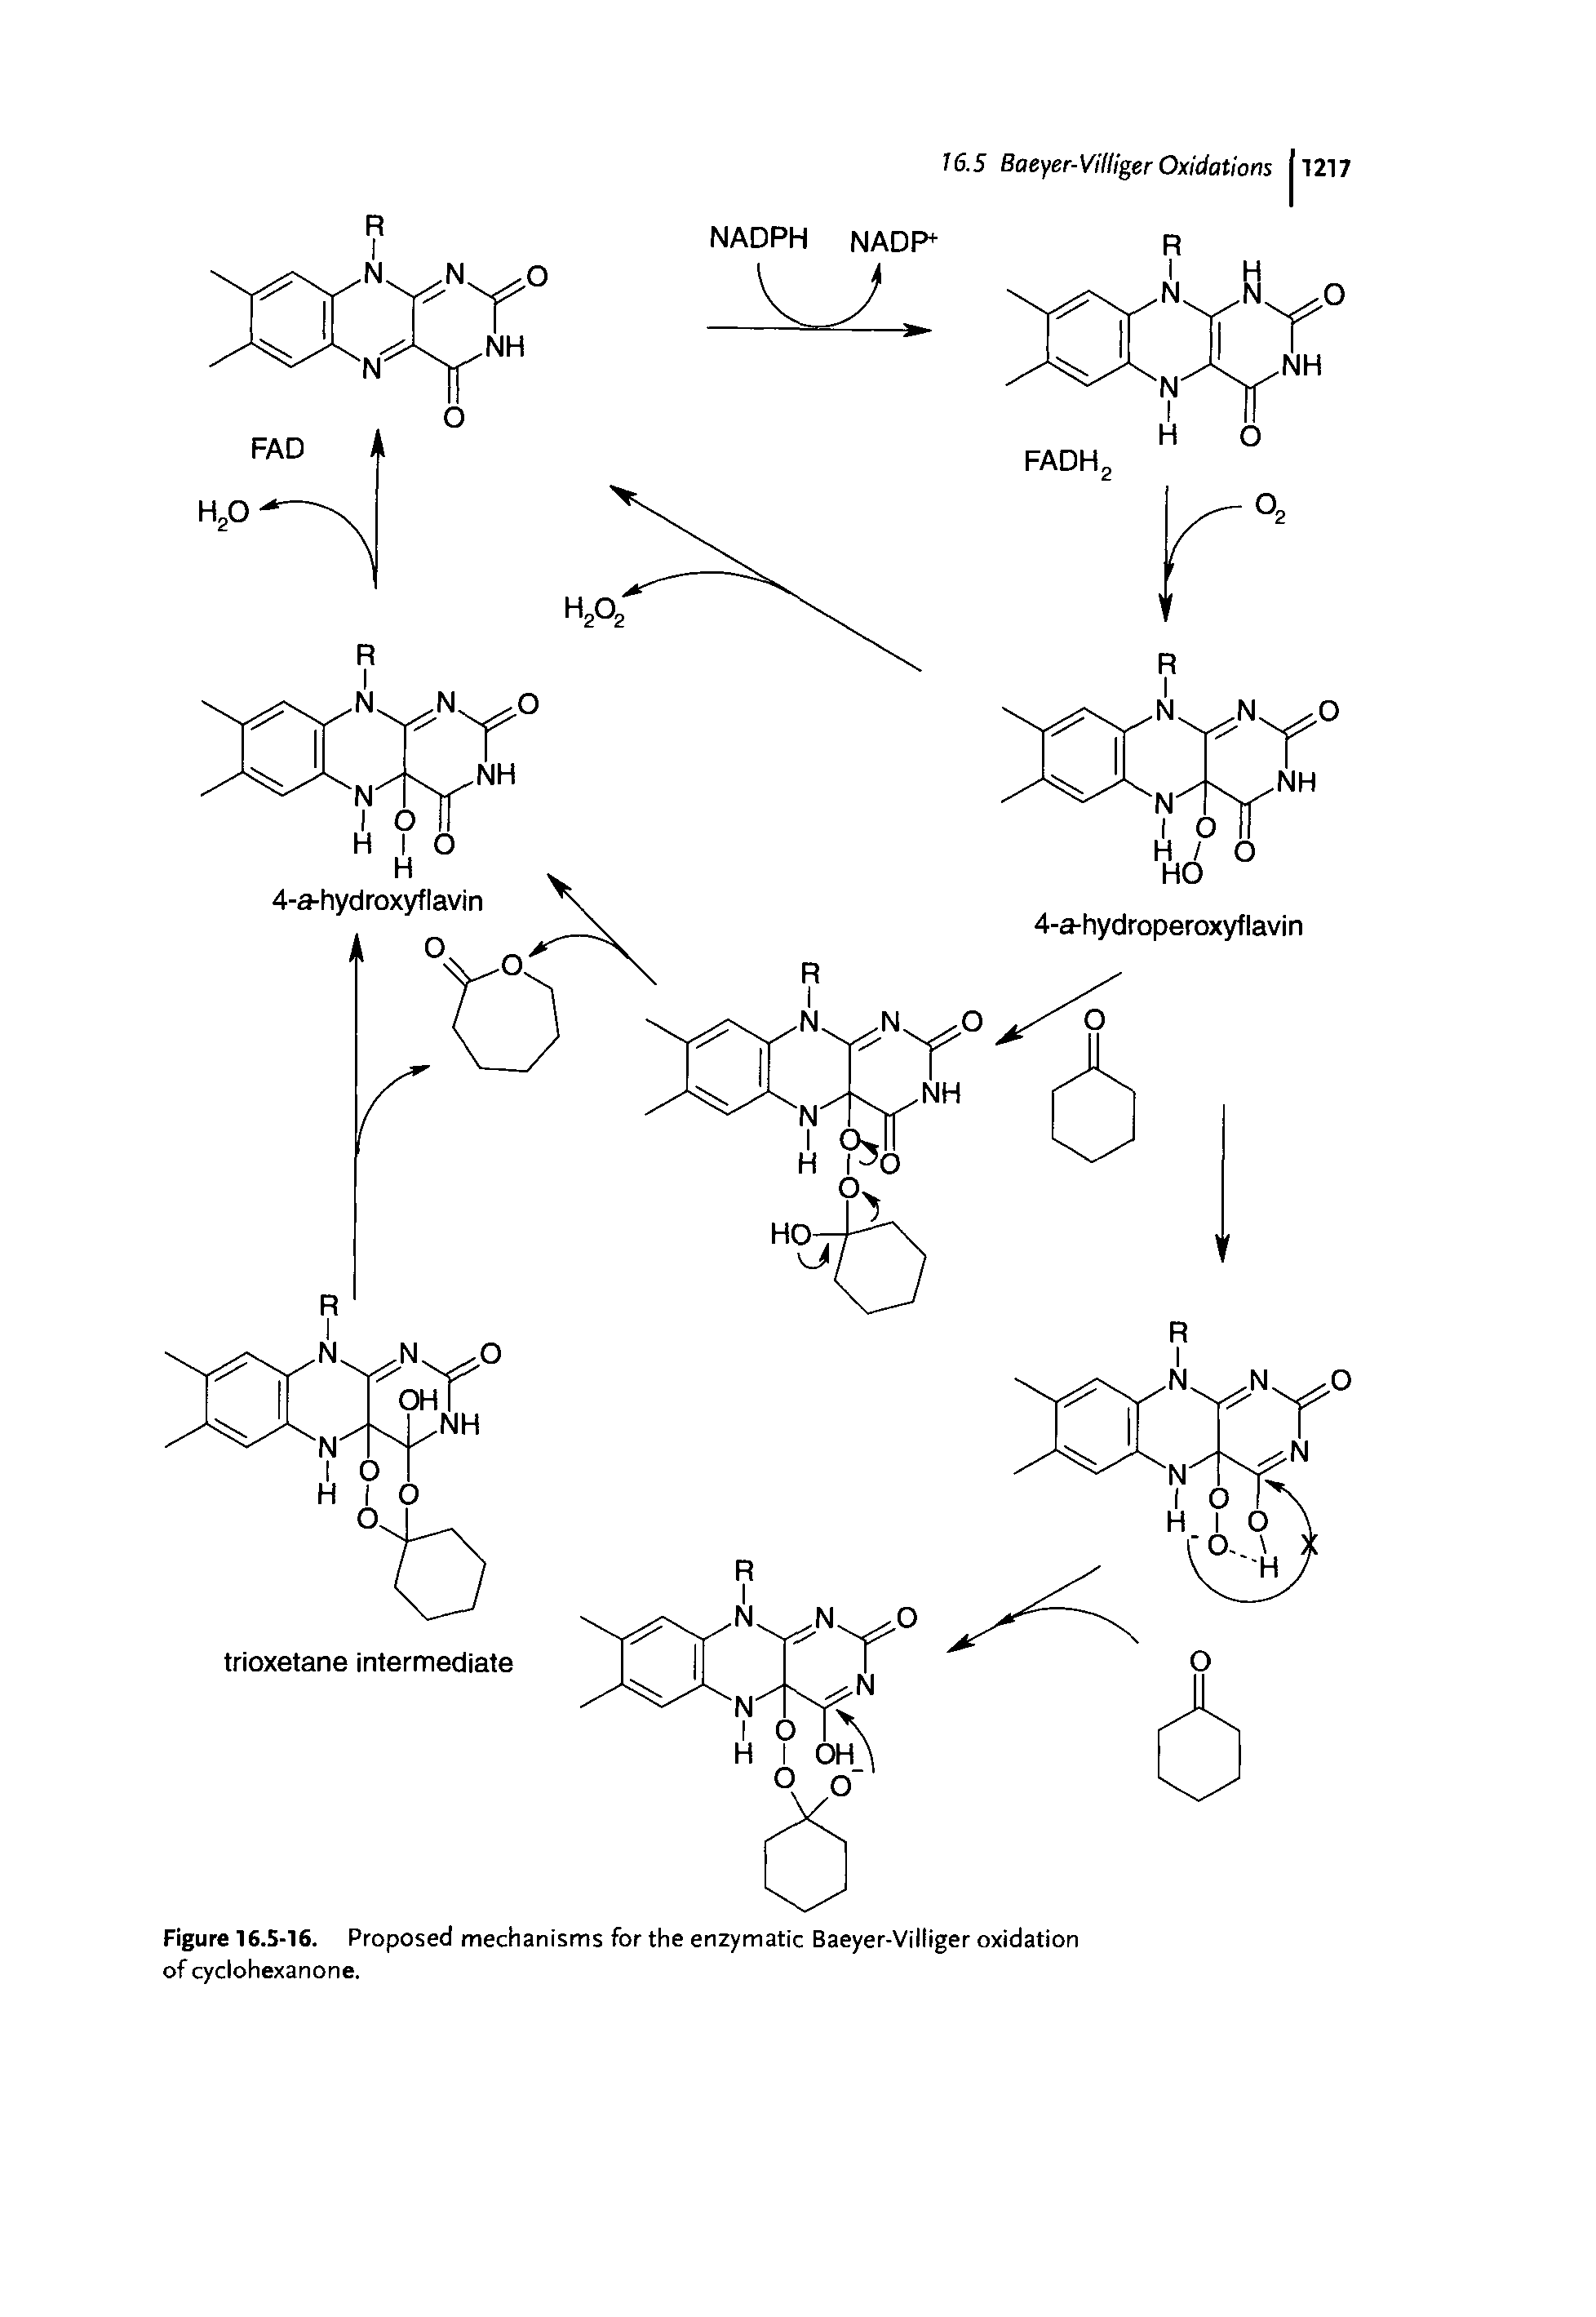 Figure 16.5-16. Proposed mechanisms for the enzymatic Baeyer-Villiger oxidation of cyclohexanone.